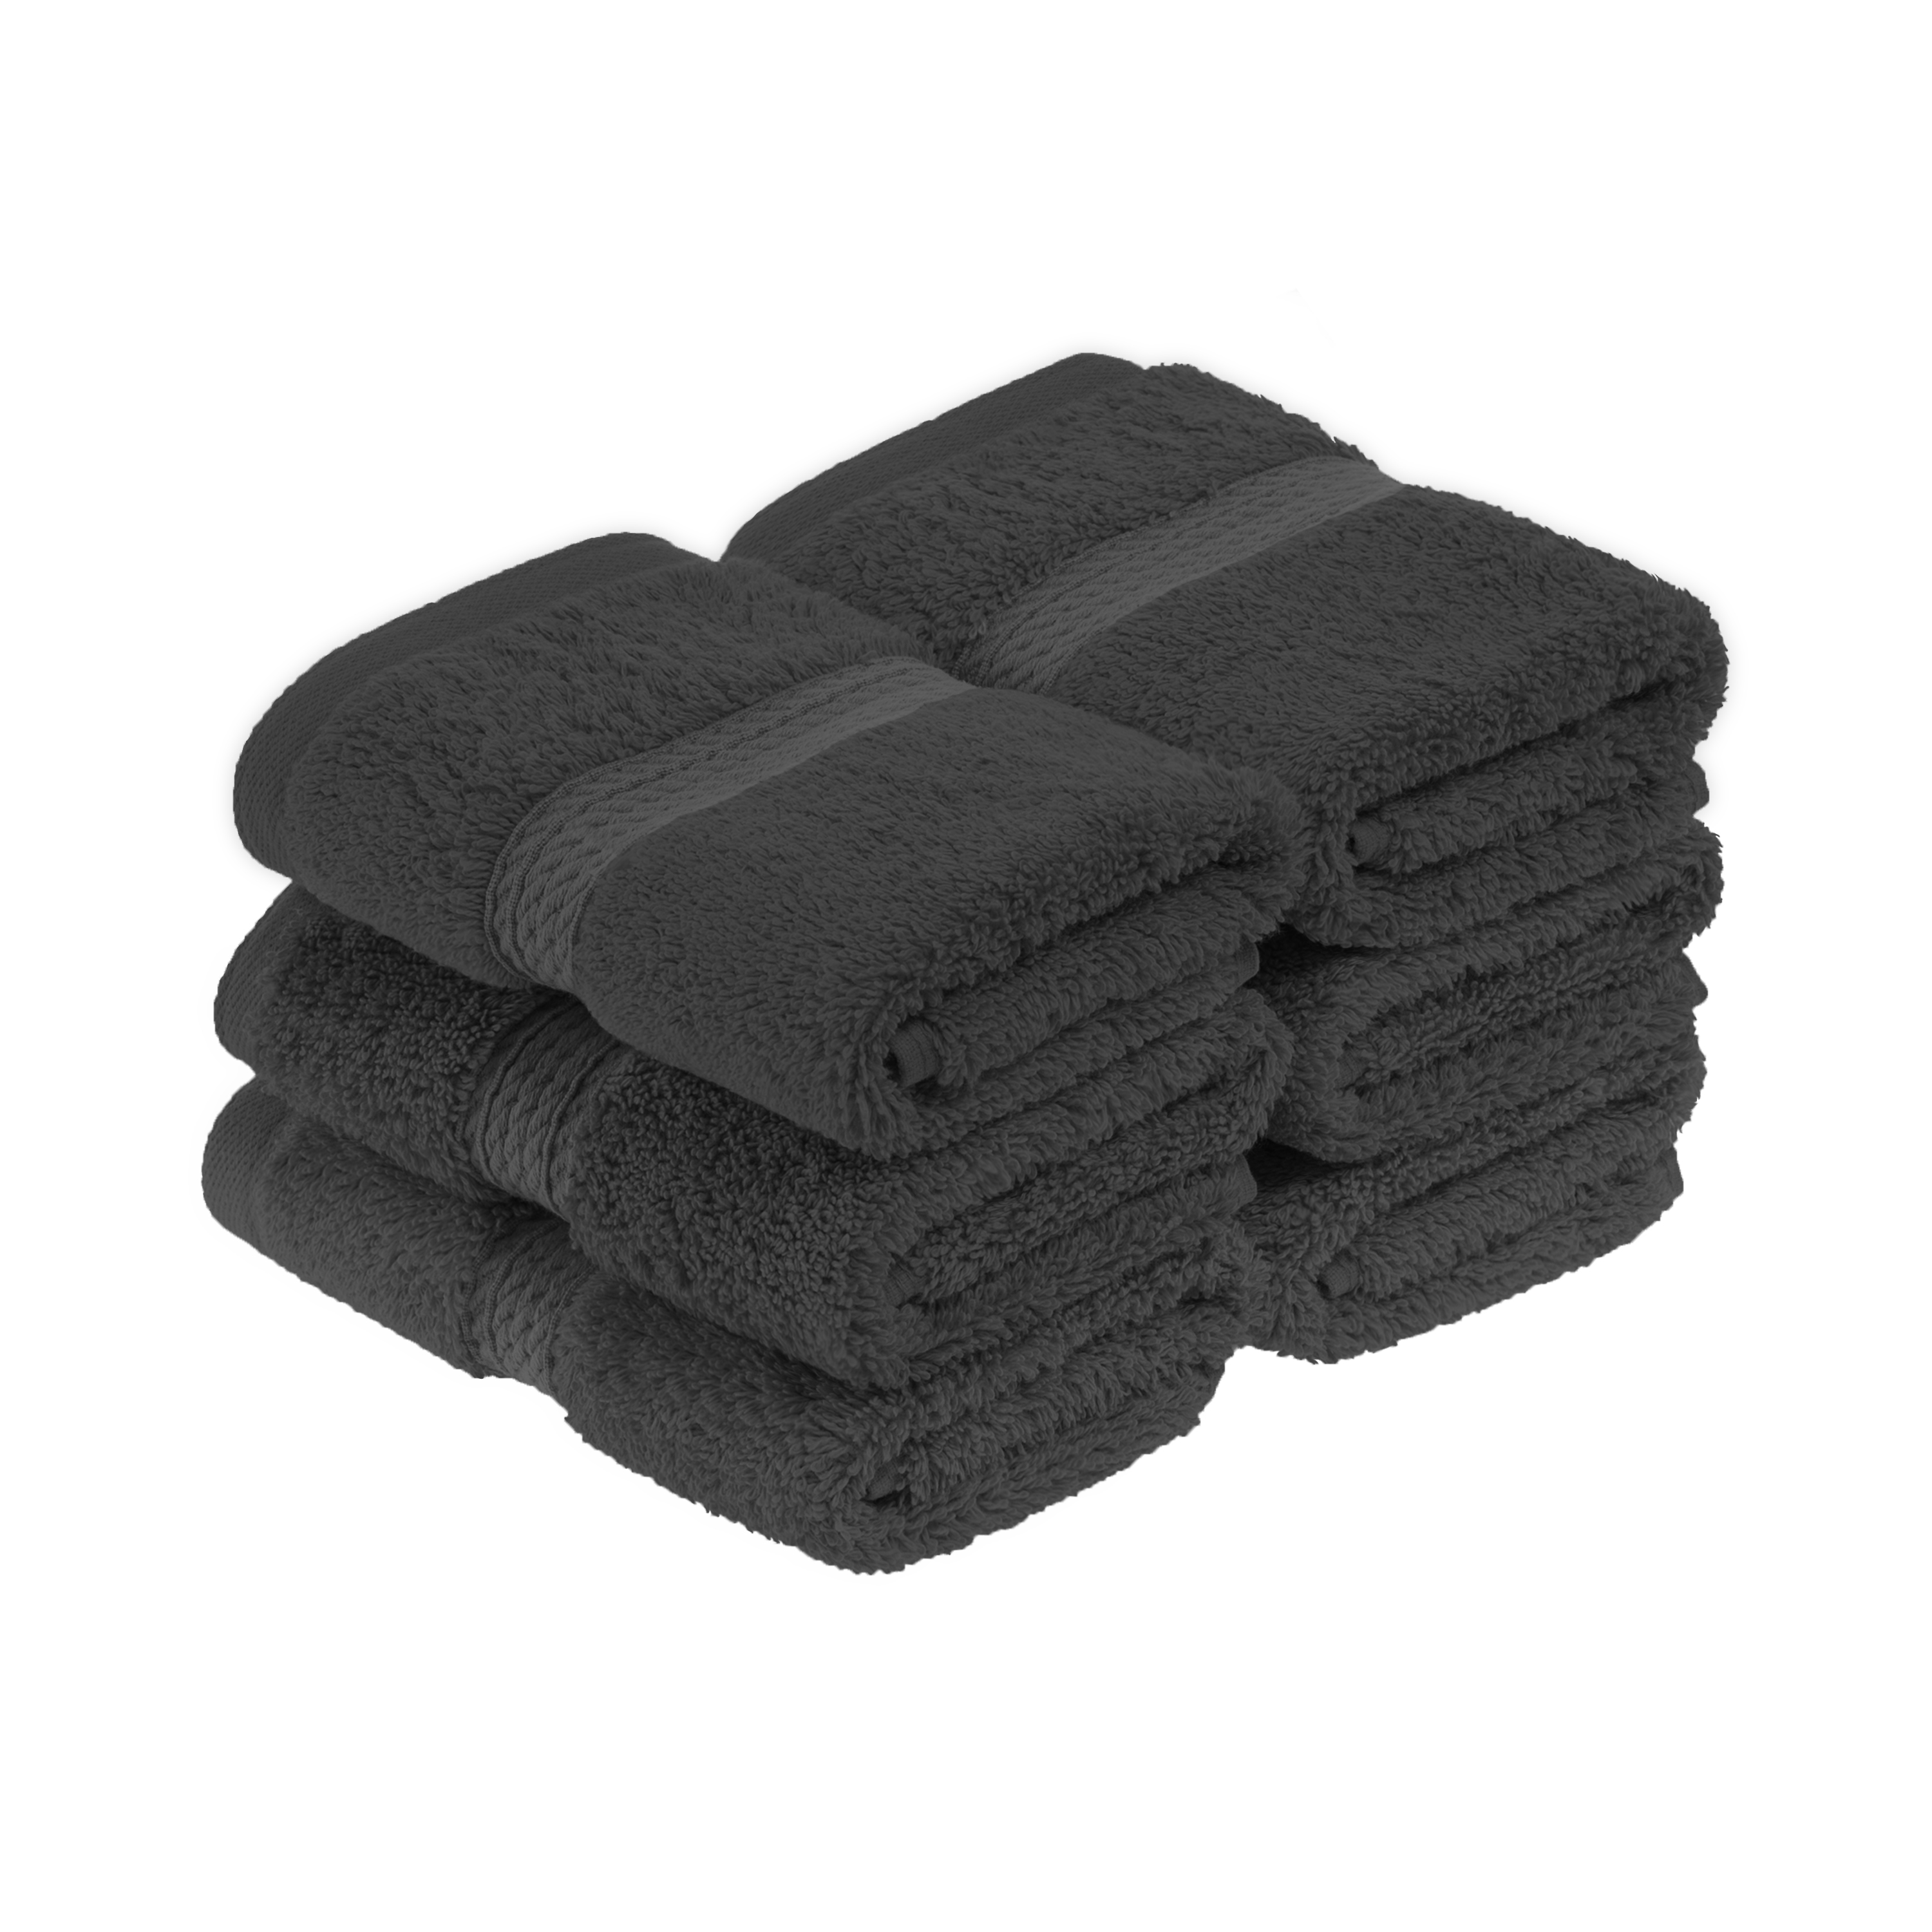 Superior Hymnia Egyptian Cotton Face Towel Set, Charcoal - image 1 of 6